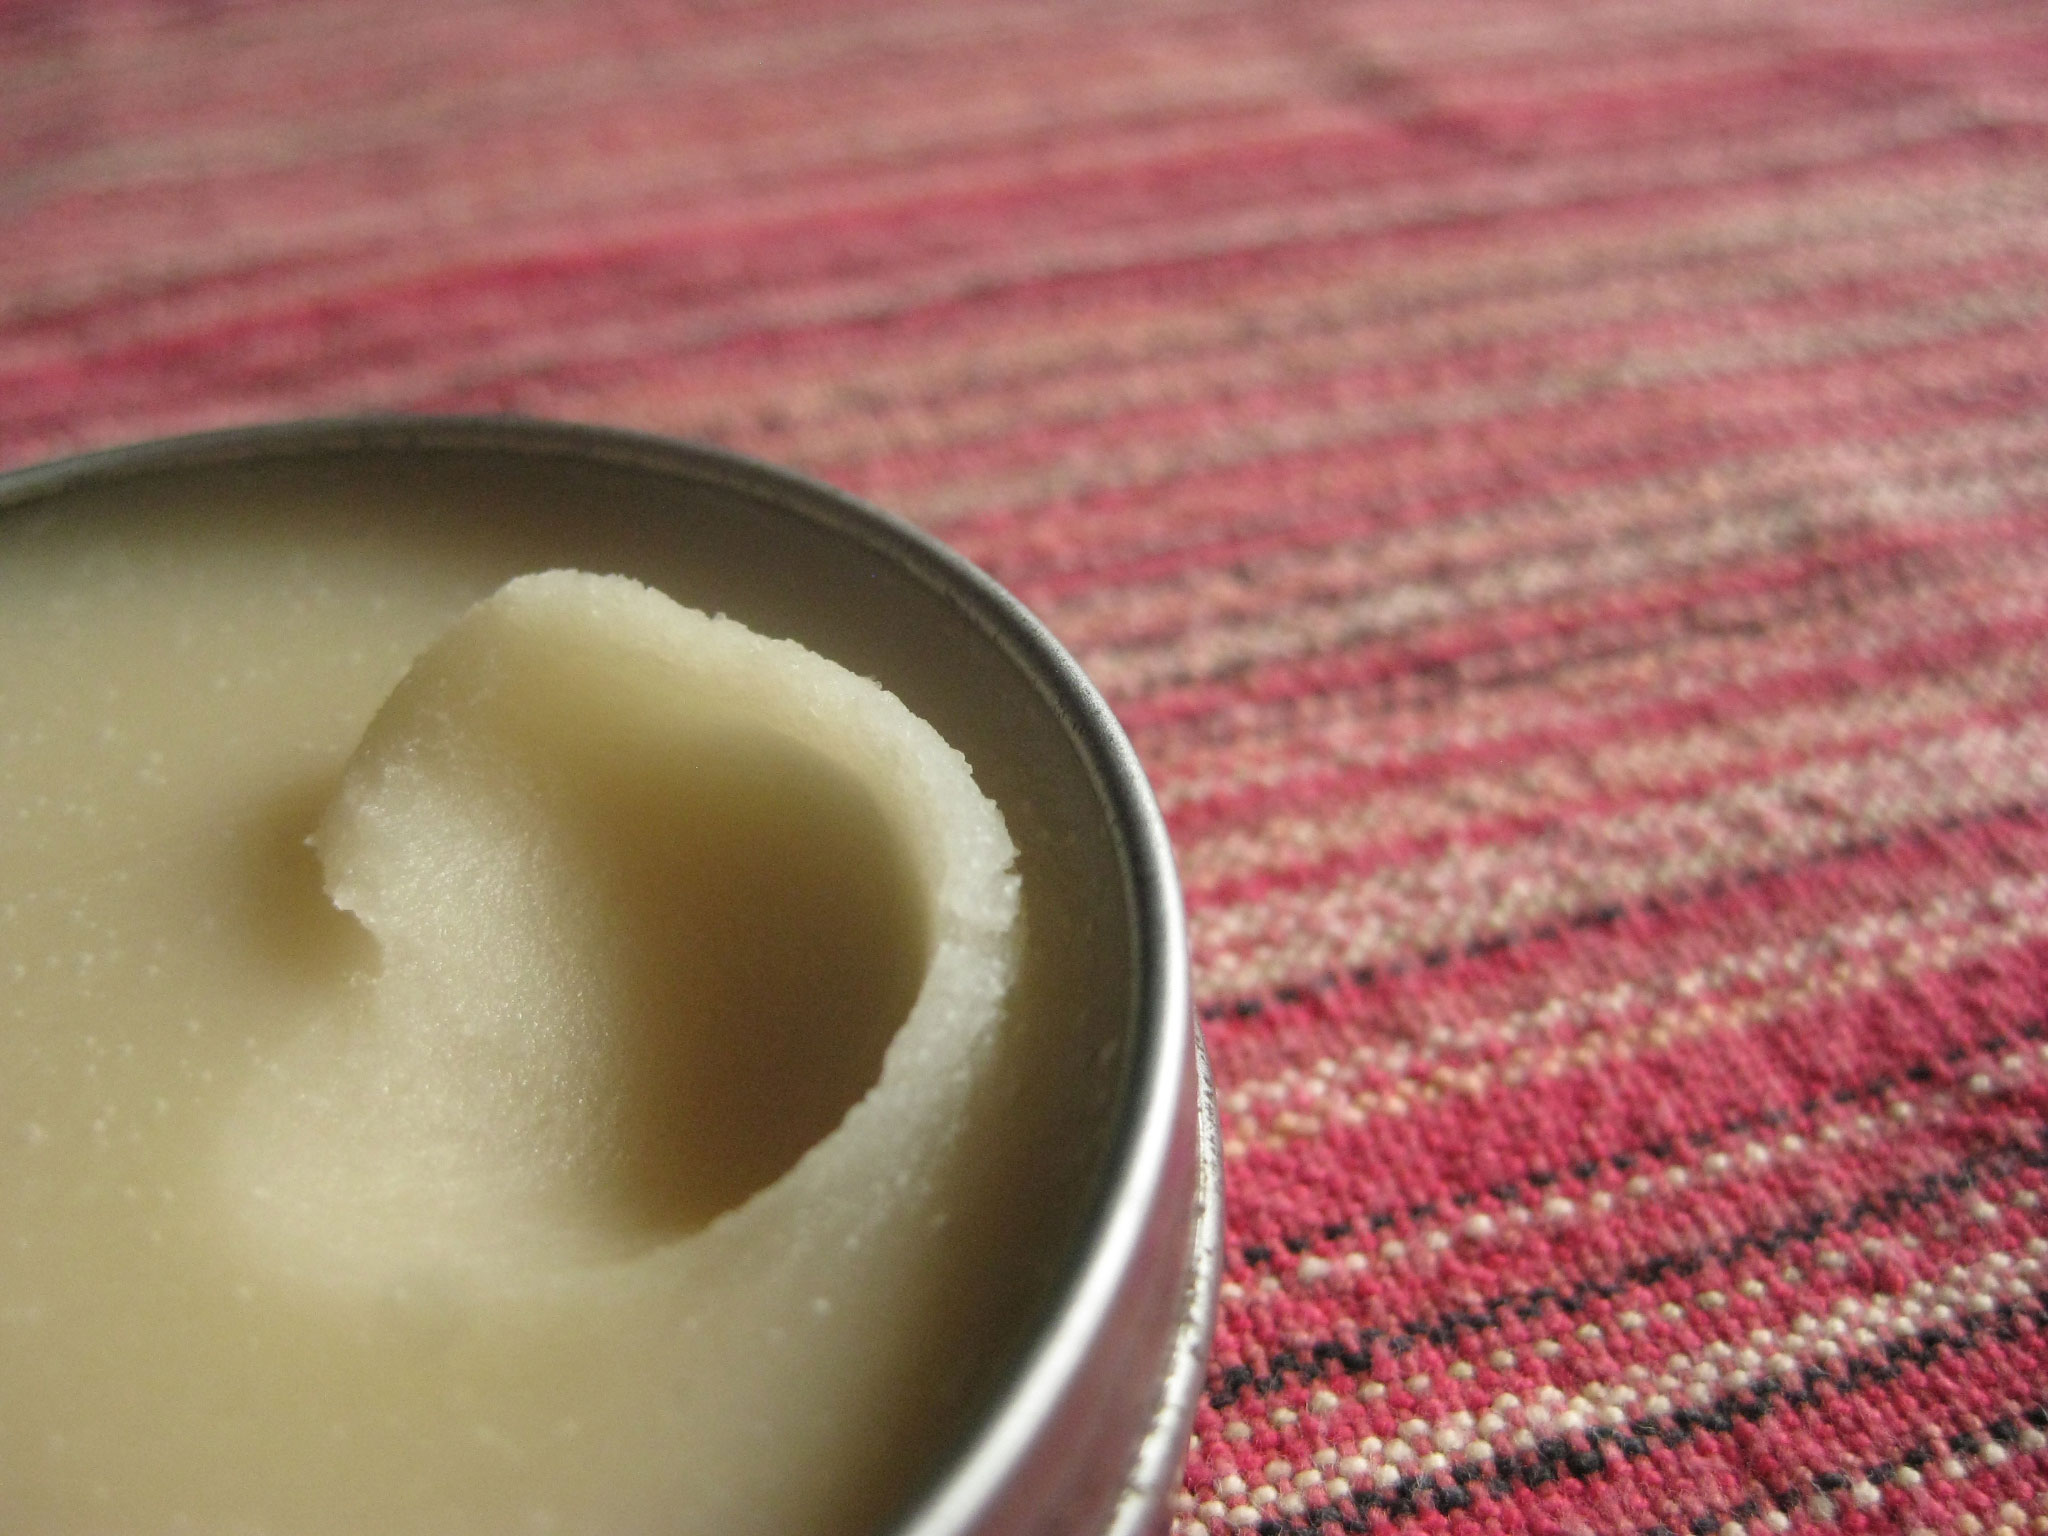 A soothing and healing burn salve for sunburns and minor everyday burns | NourishingJoy.com